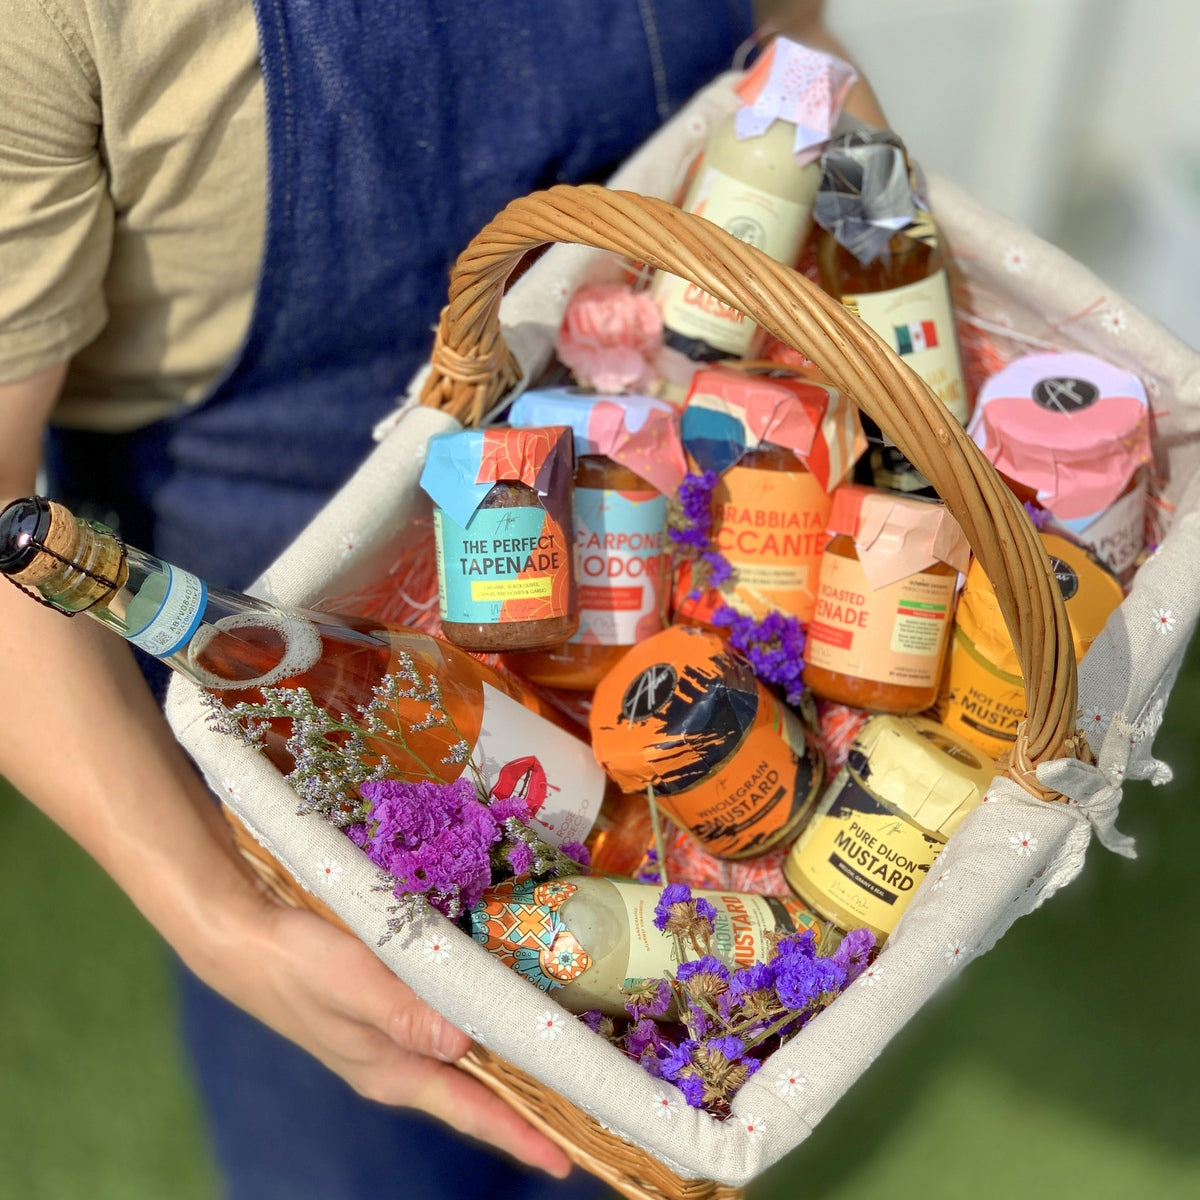 The Atlas Handcrafted Gourmet Picnic Gift Basket